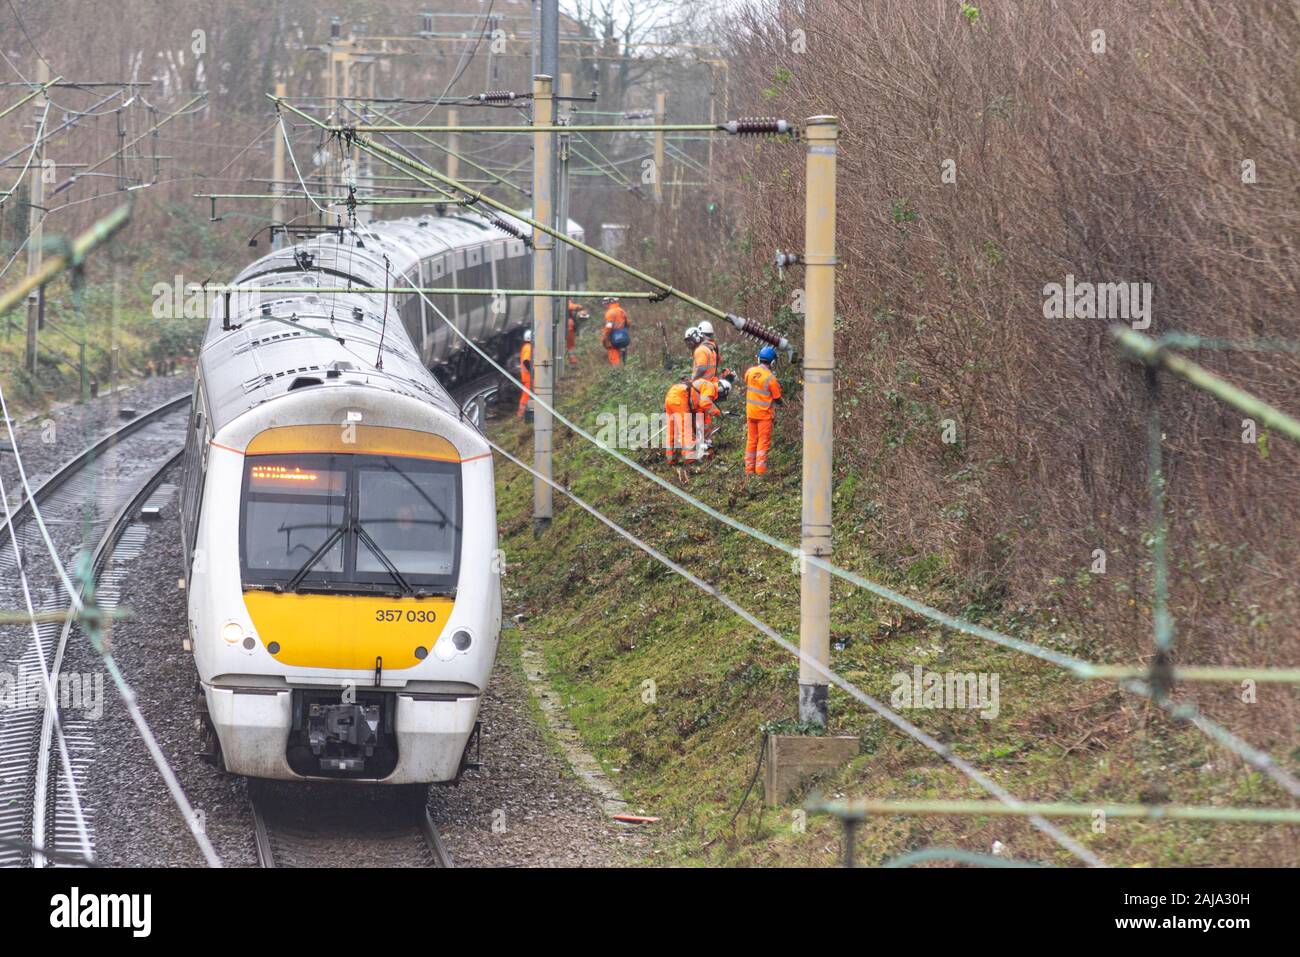 RailScape workers cutting back vegetation close to the track of the C2C railway in Southend on Sea, Essex, UK. Permanent way crew with train passing Stock Photo